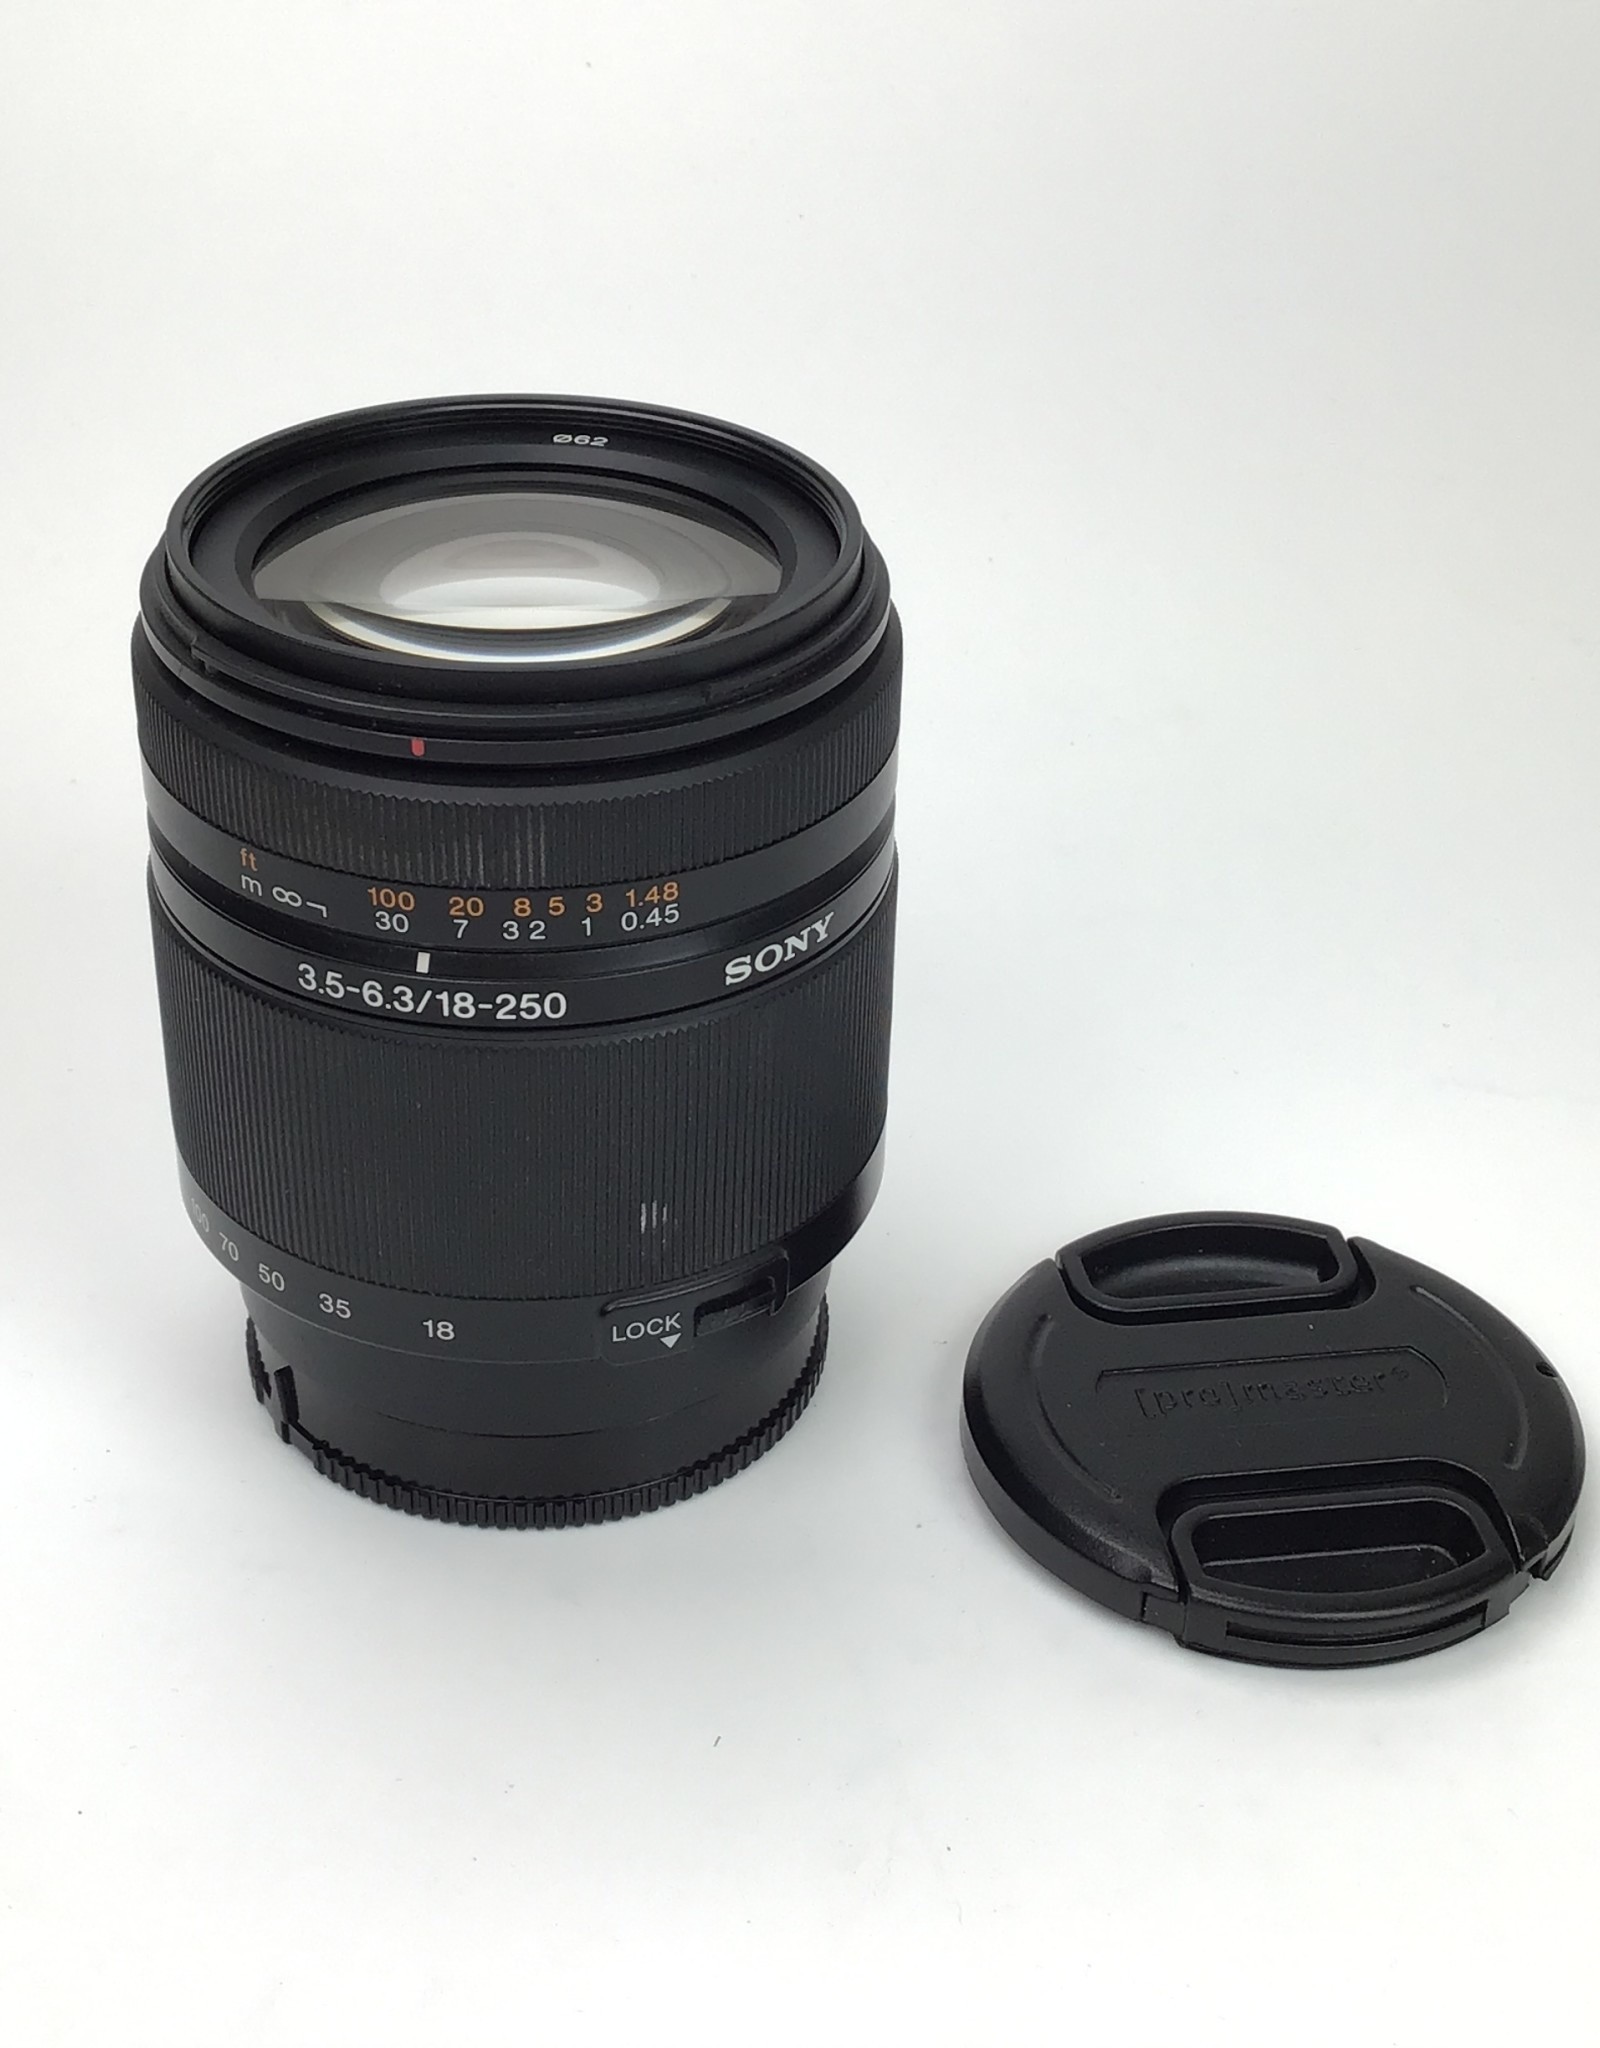 SONY Sony DT 18-250mm f3.5-6.3 Lens for A Mount Used Good